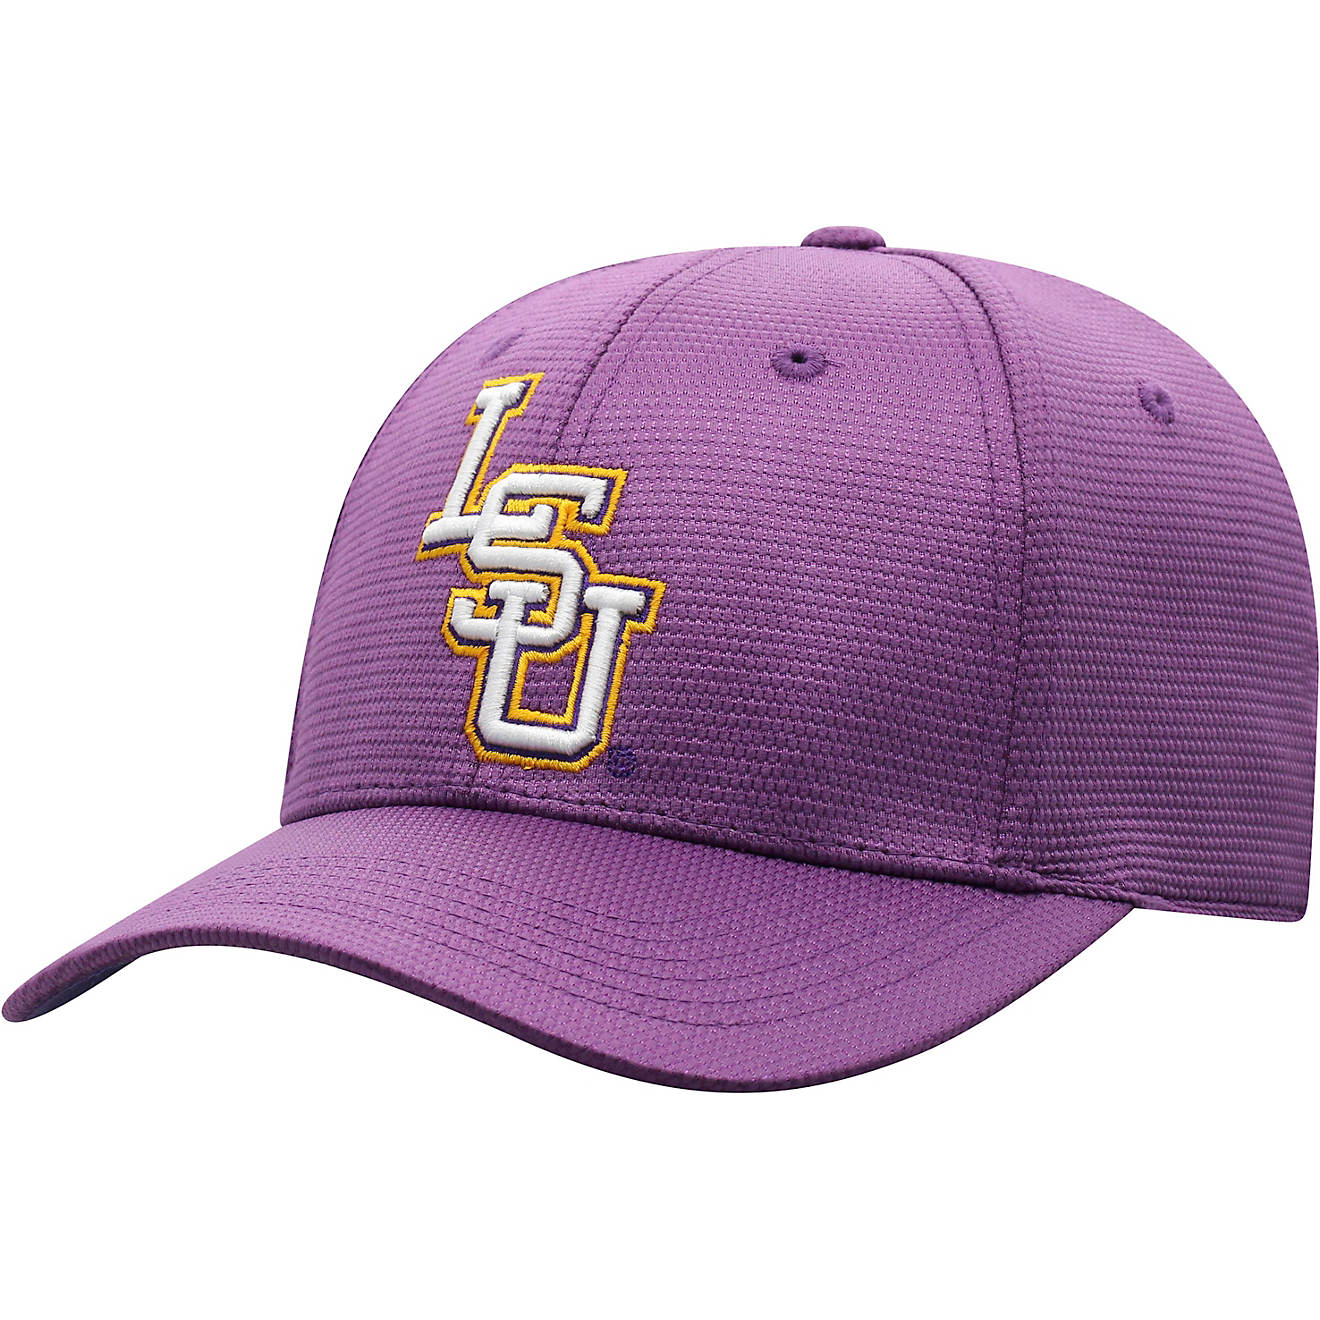 Top of the World Men's Louisiana State University Progo Cap                                                                      - view number 1